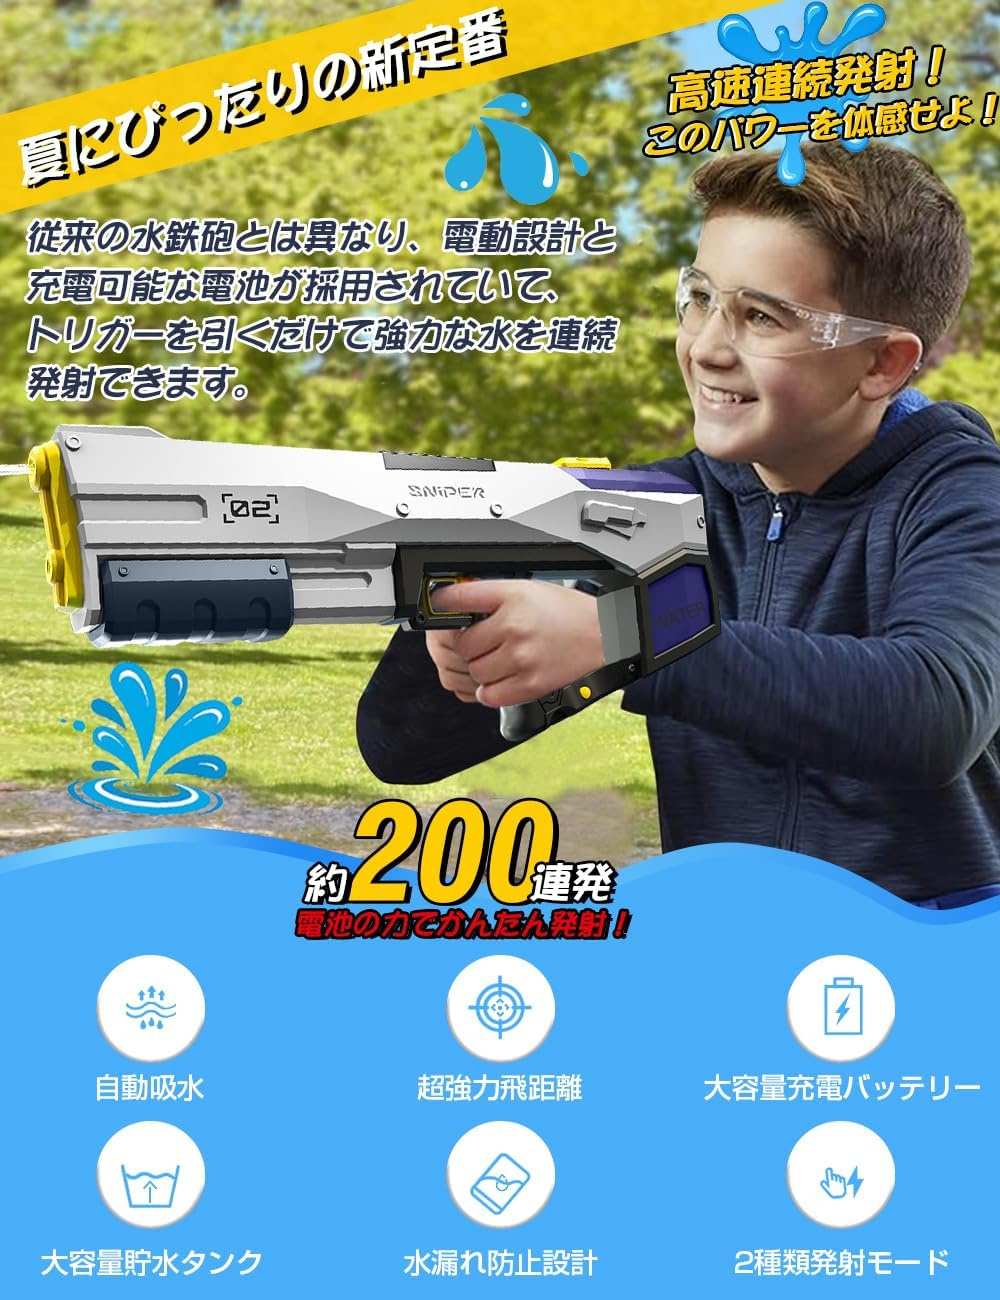  electric water gun water pistol electric automatic water supply super powerful . distance electric water piste ru playing in water child adult water .... water pistol . war sea water ./ pool / river playing summer vacation present 